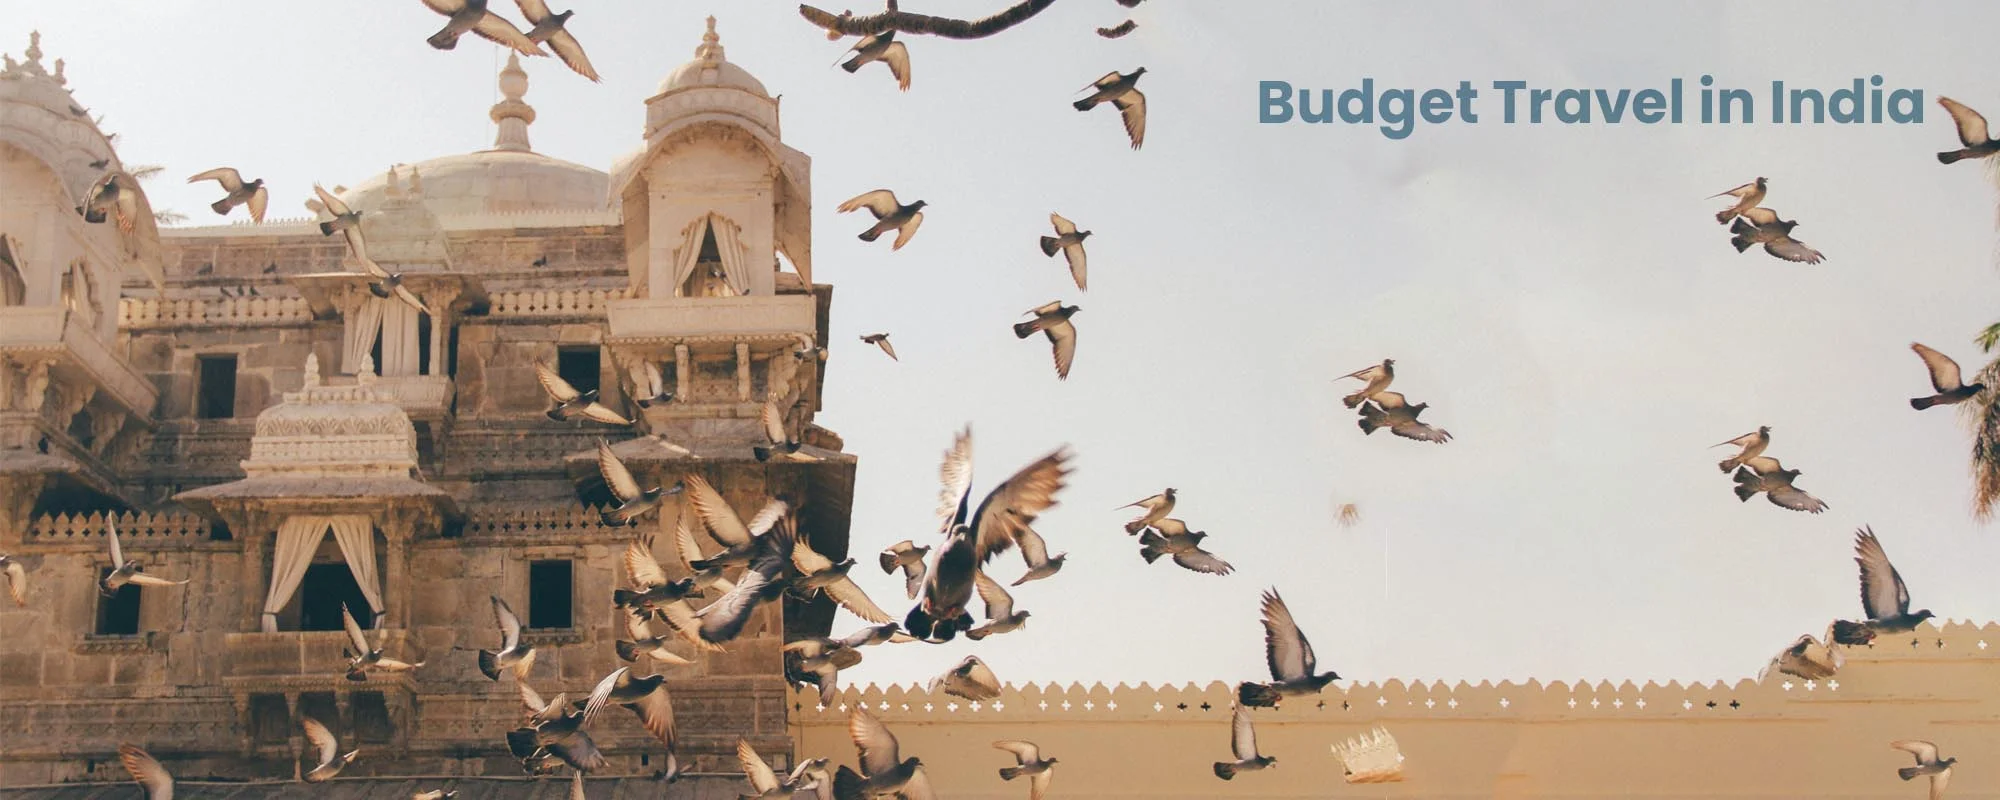 Budget Travel In India